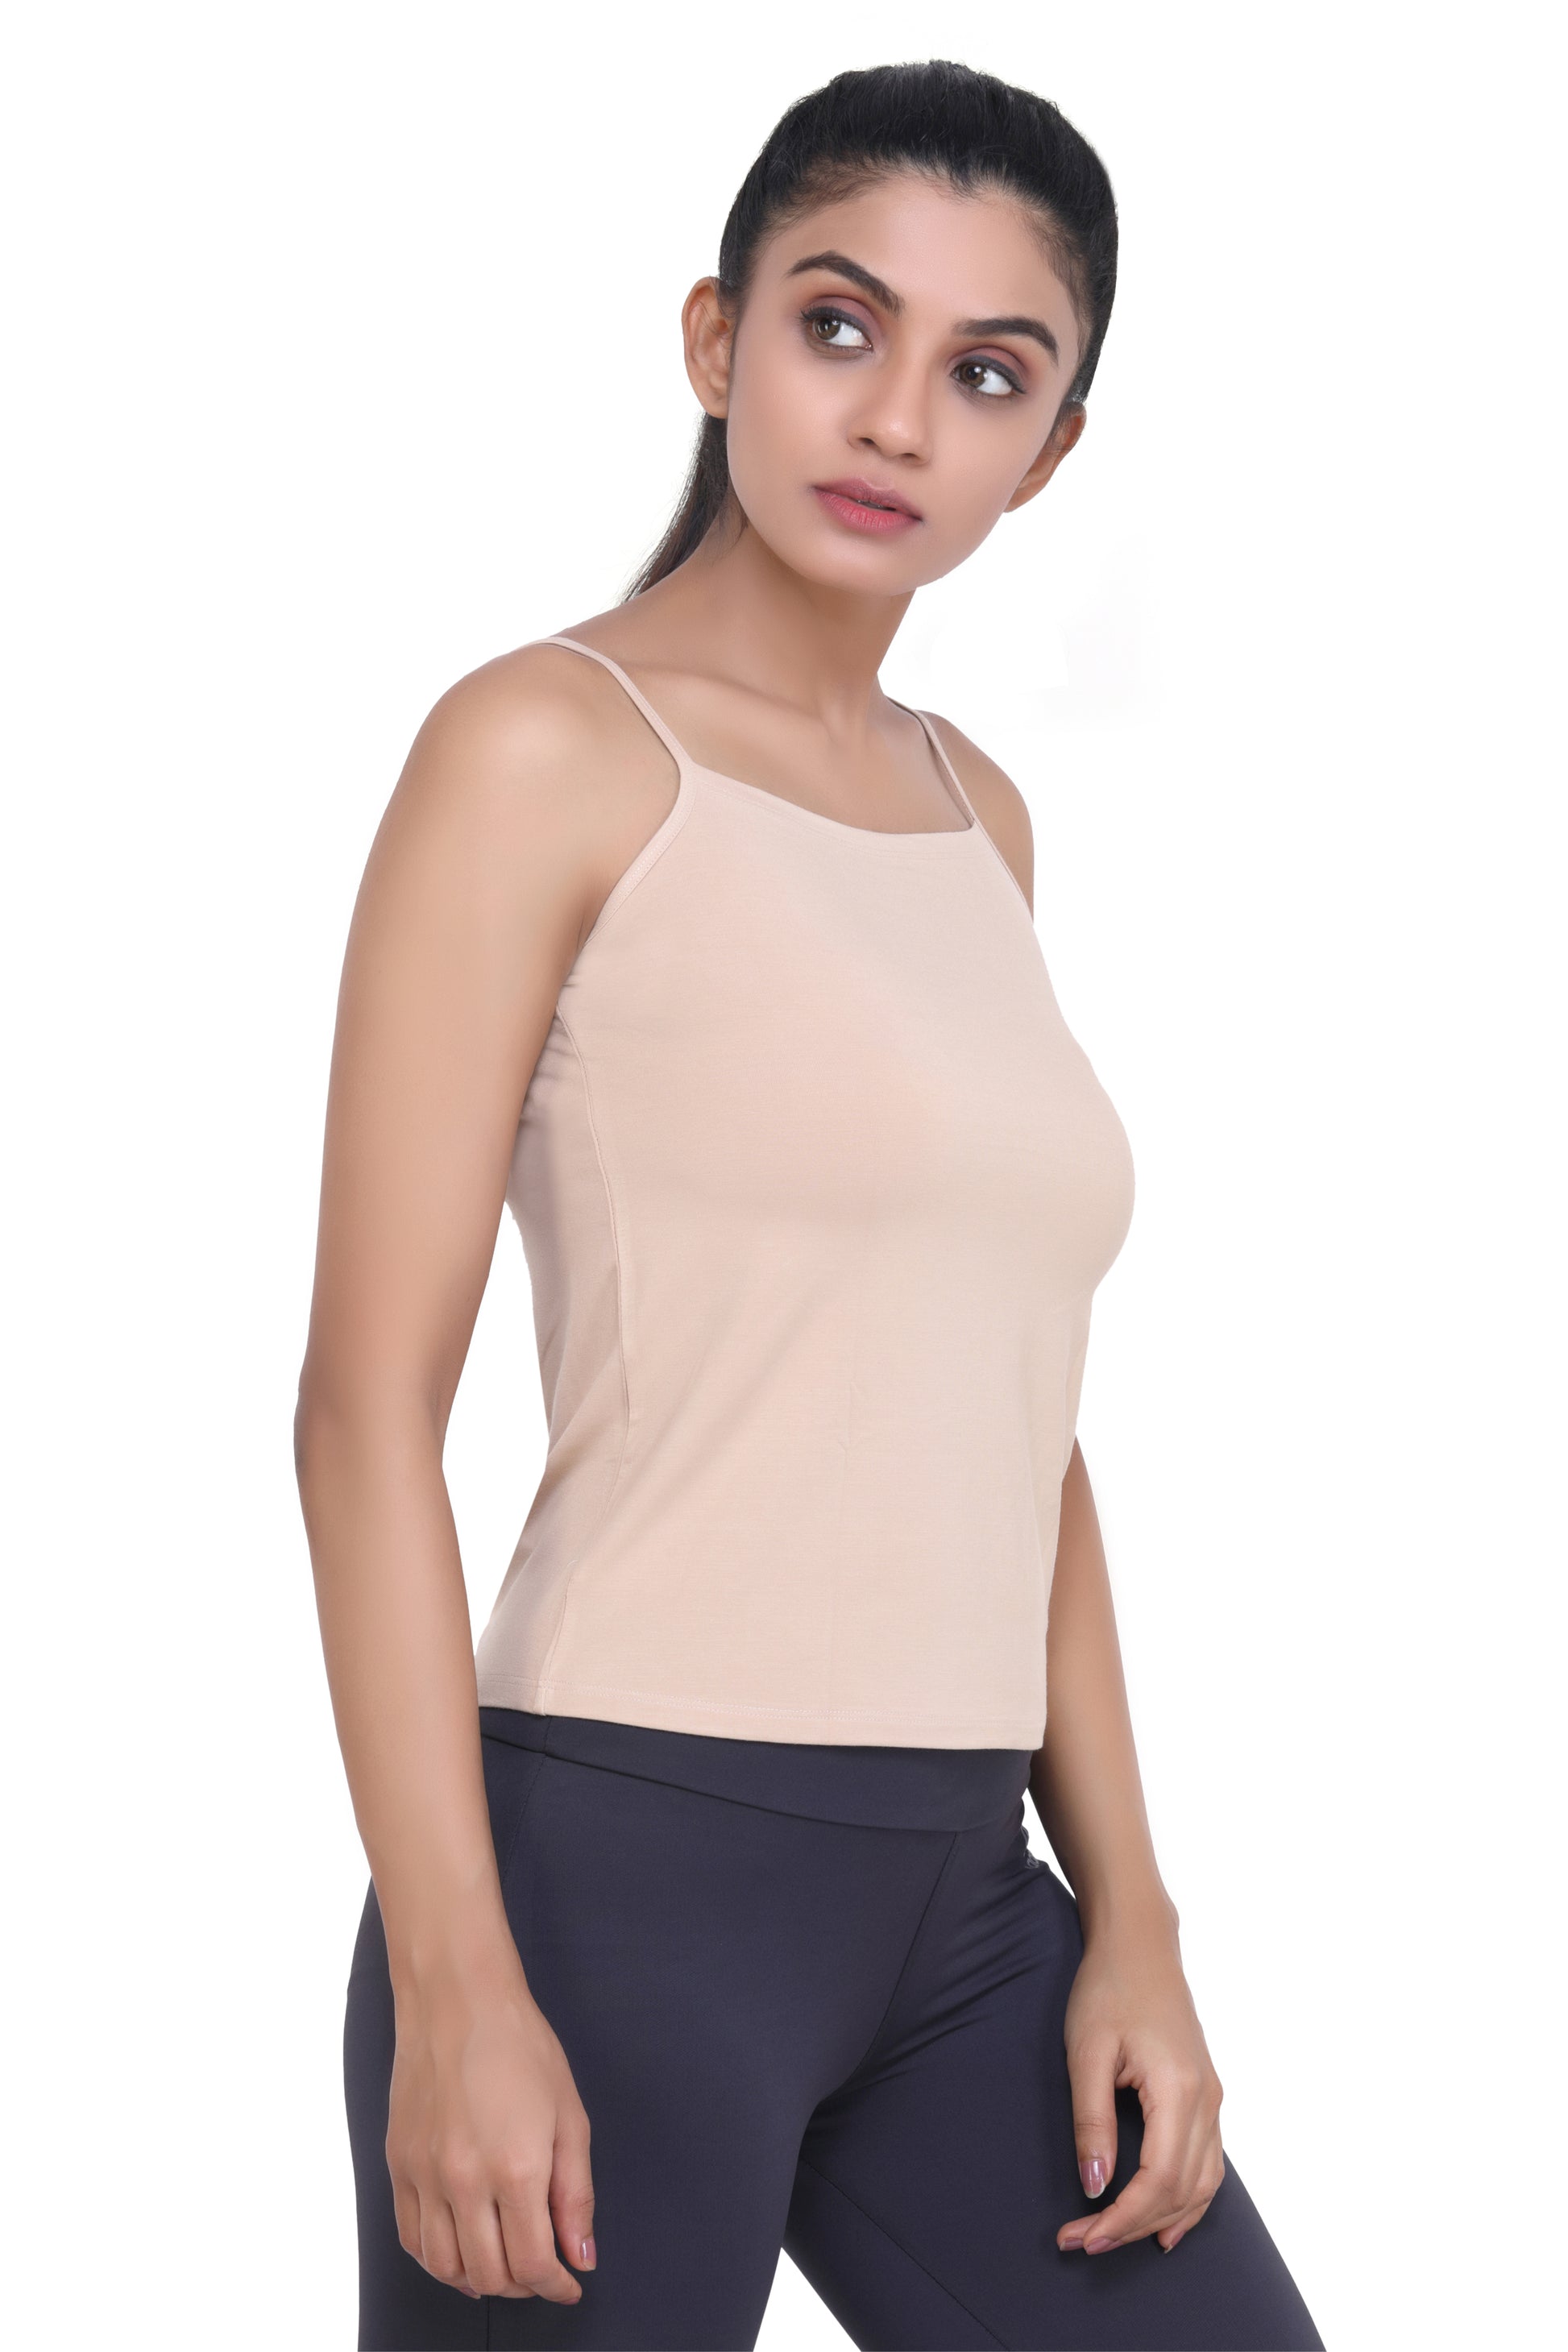 Laasa Sports Women's Slip, Inner & Outer Wear at Rs 425/piece in Mumbai